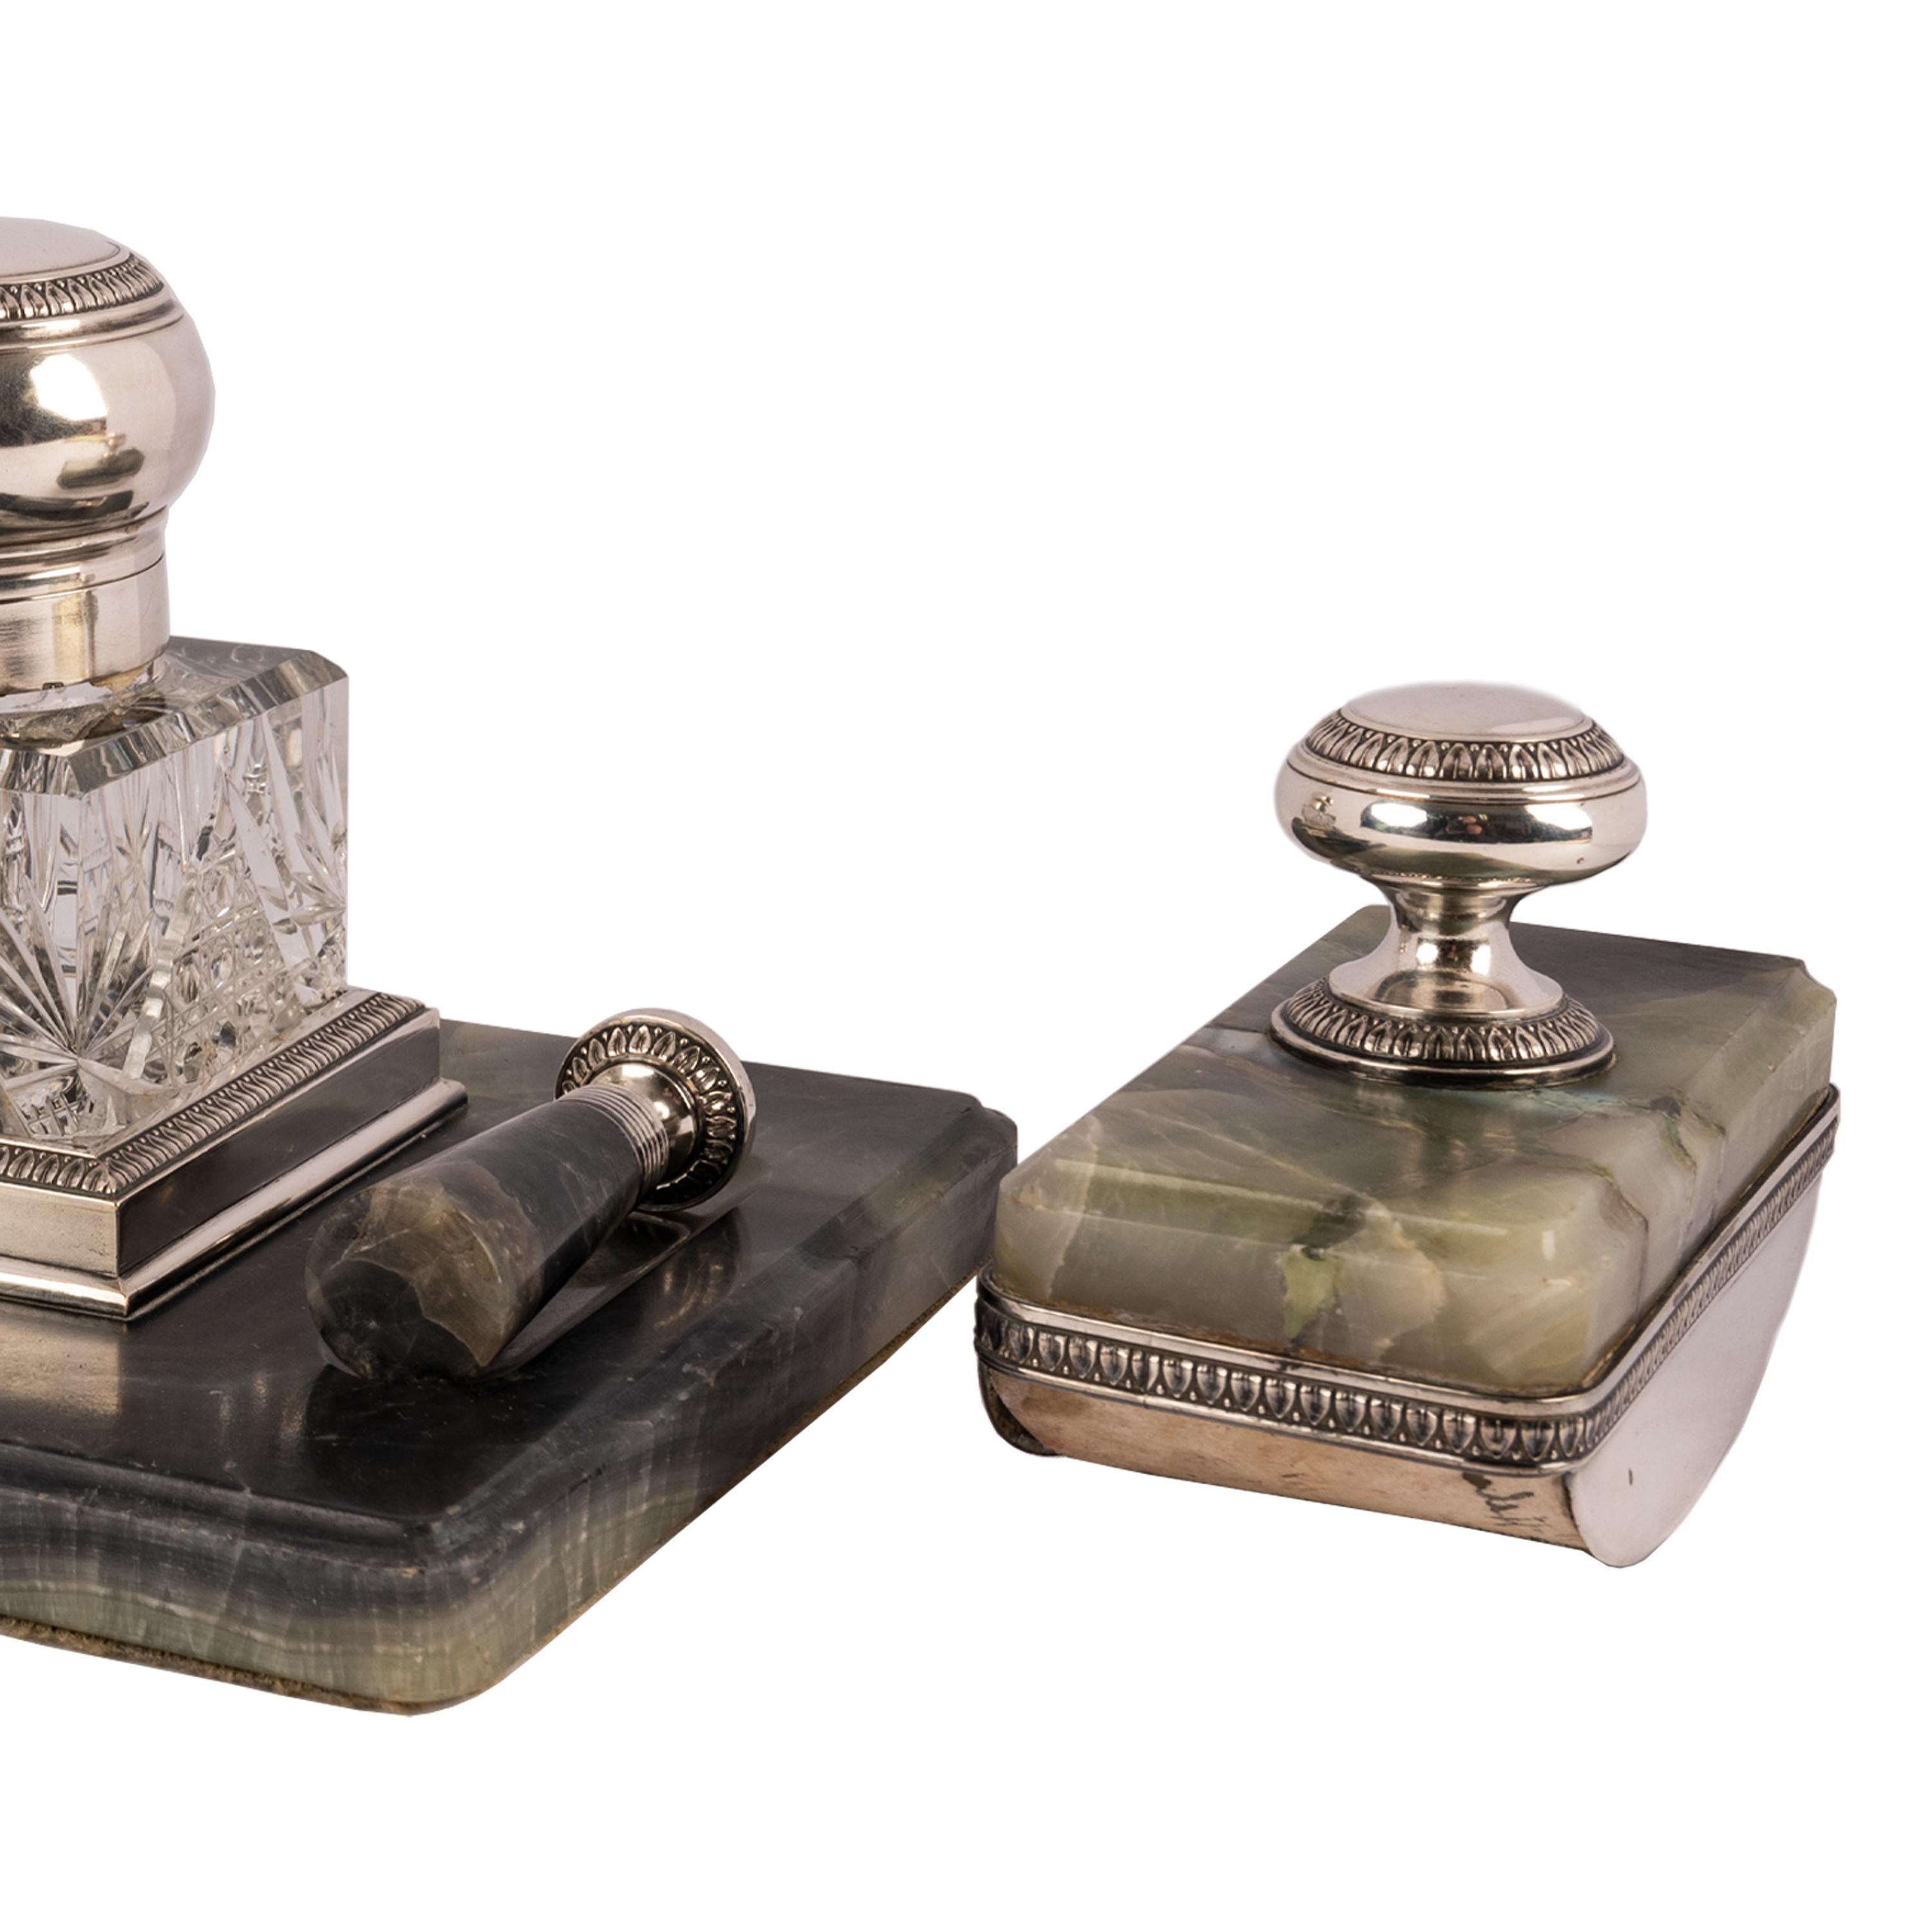 Late 19th Century Antique Russian Imperial Silver & Onyx Desk Writing Pen Set Inkwell Blotter Seal